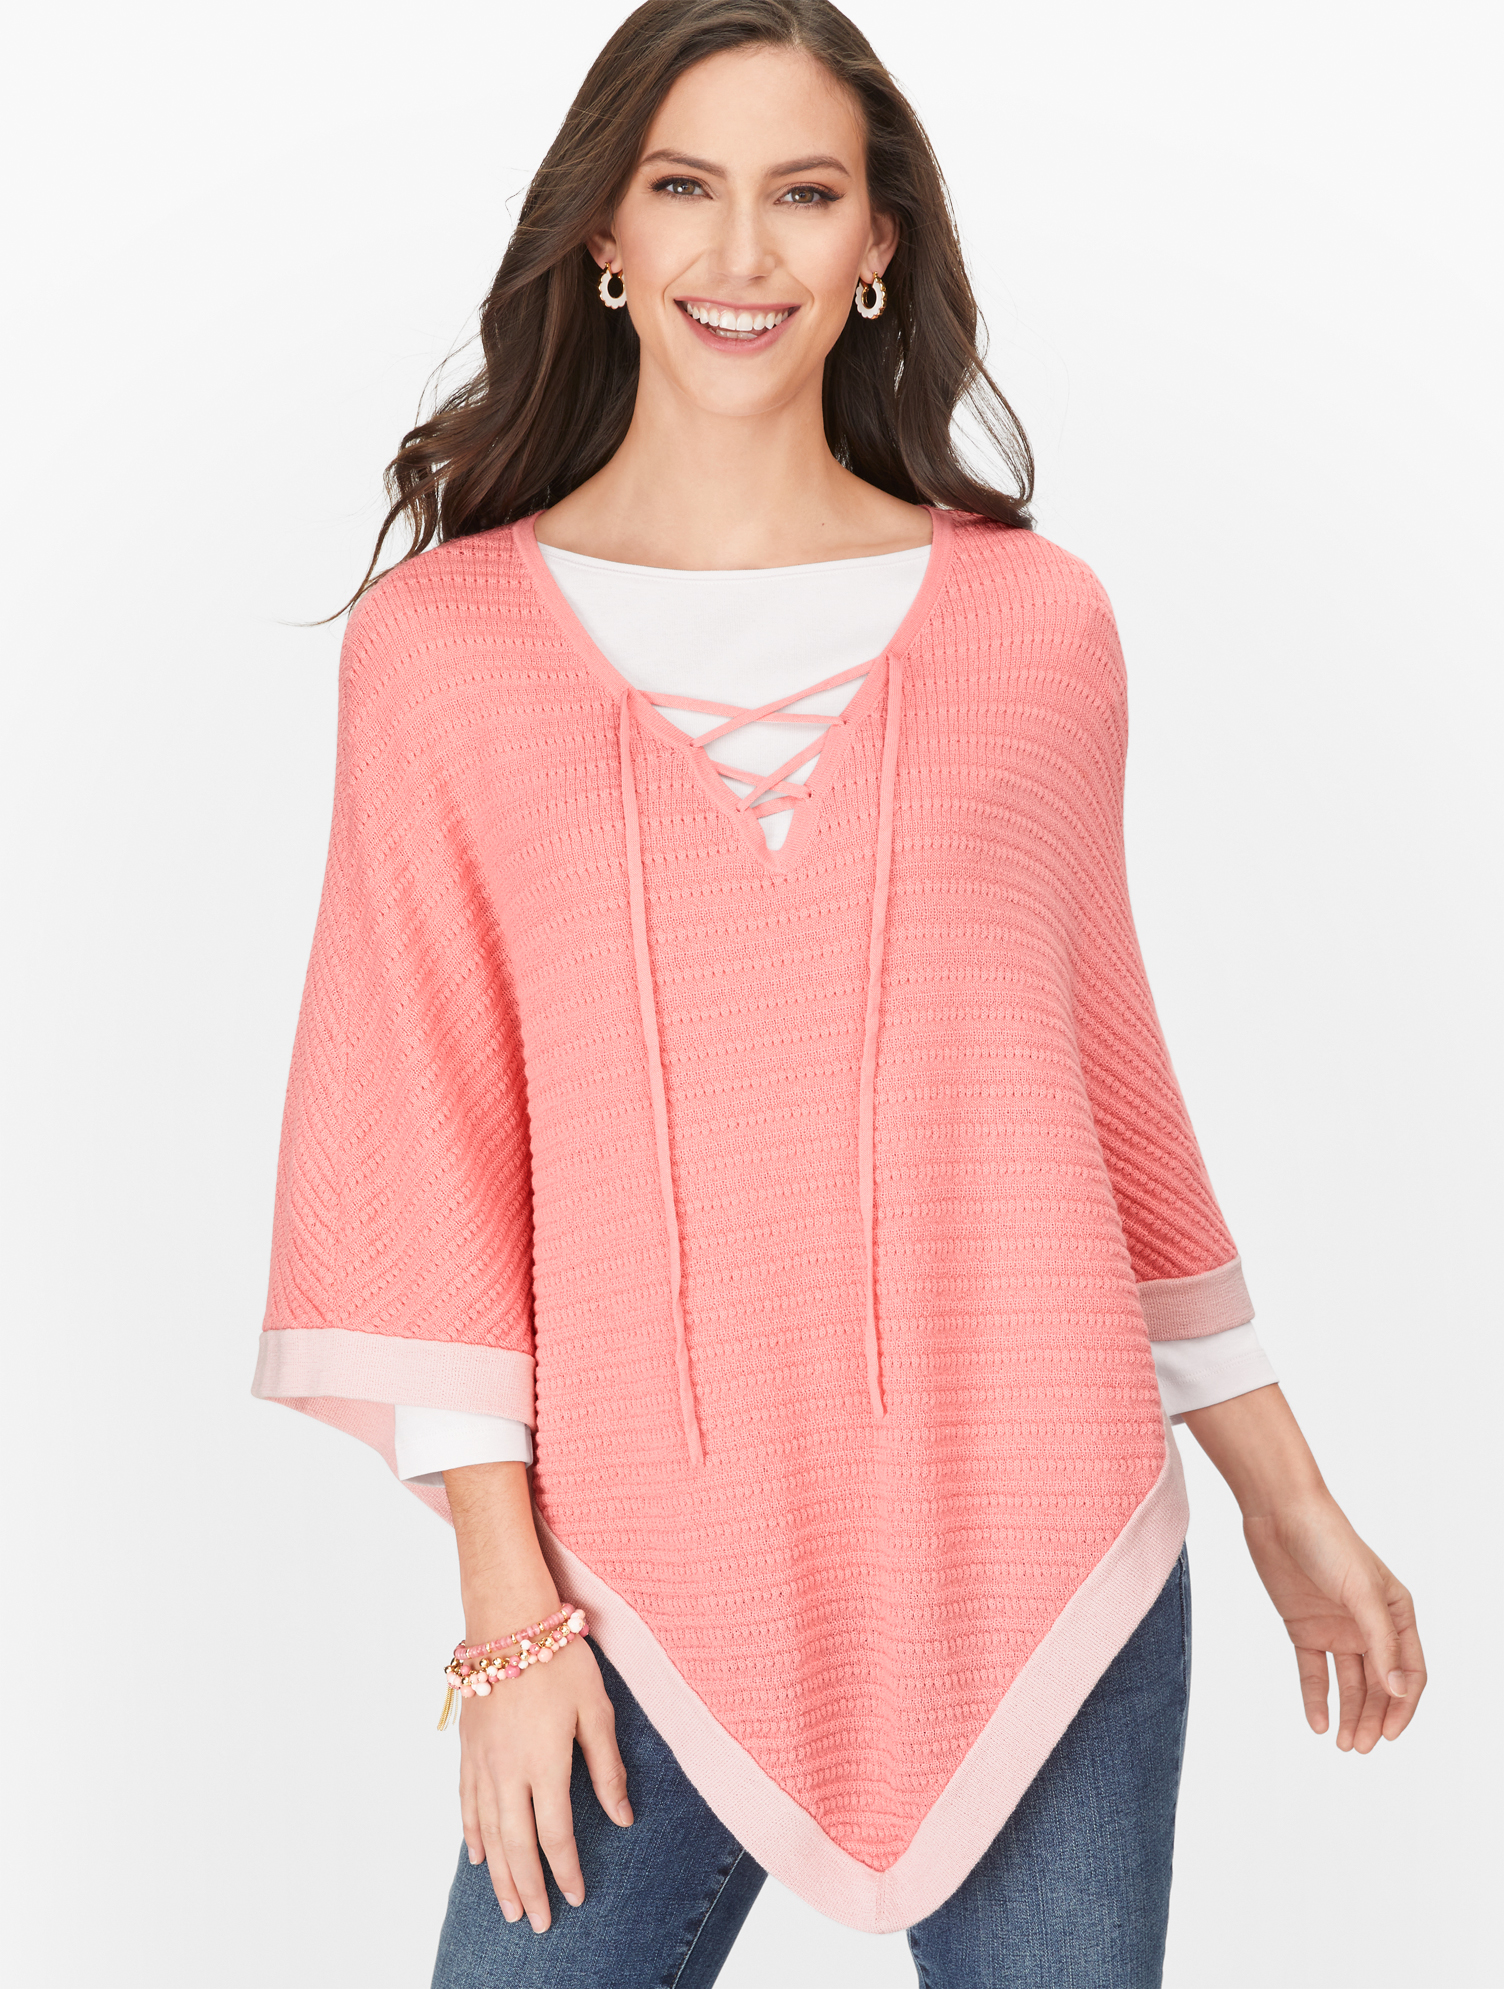 Talbots Lace-up Poncho - Tipped - Preppy Pink/blush Pink - Xs  In Preppy Pink,blush Pink